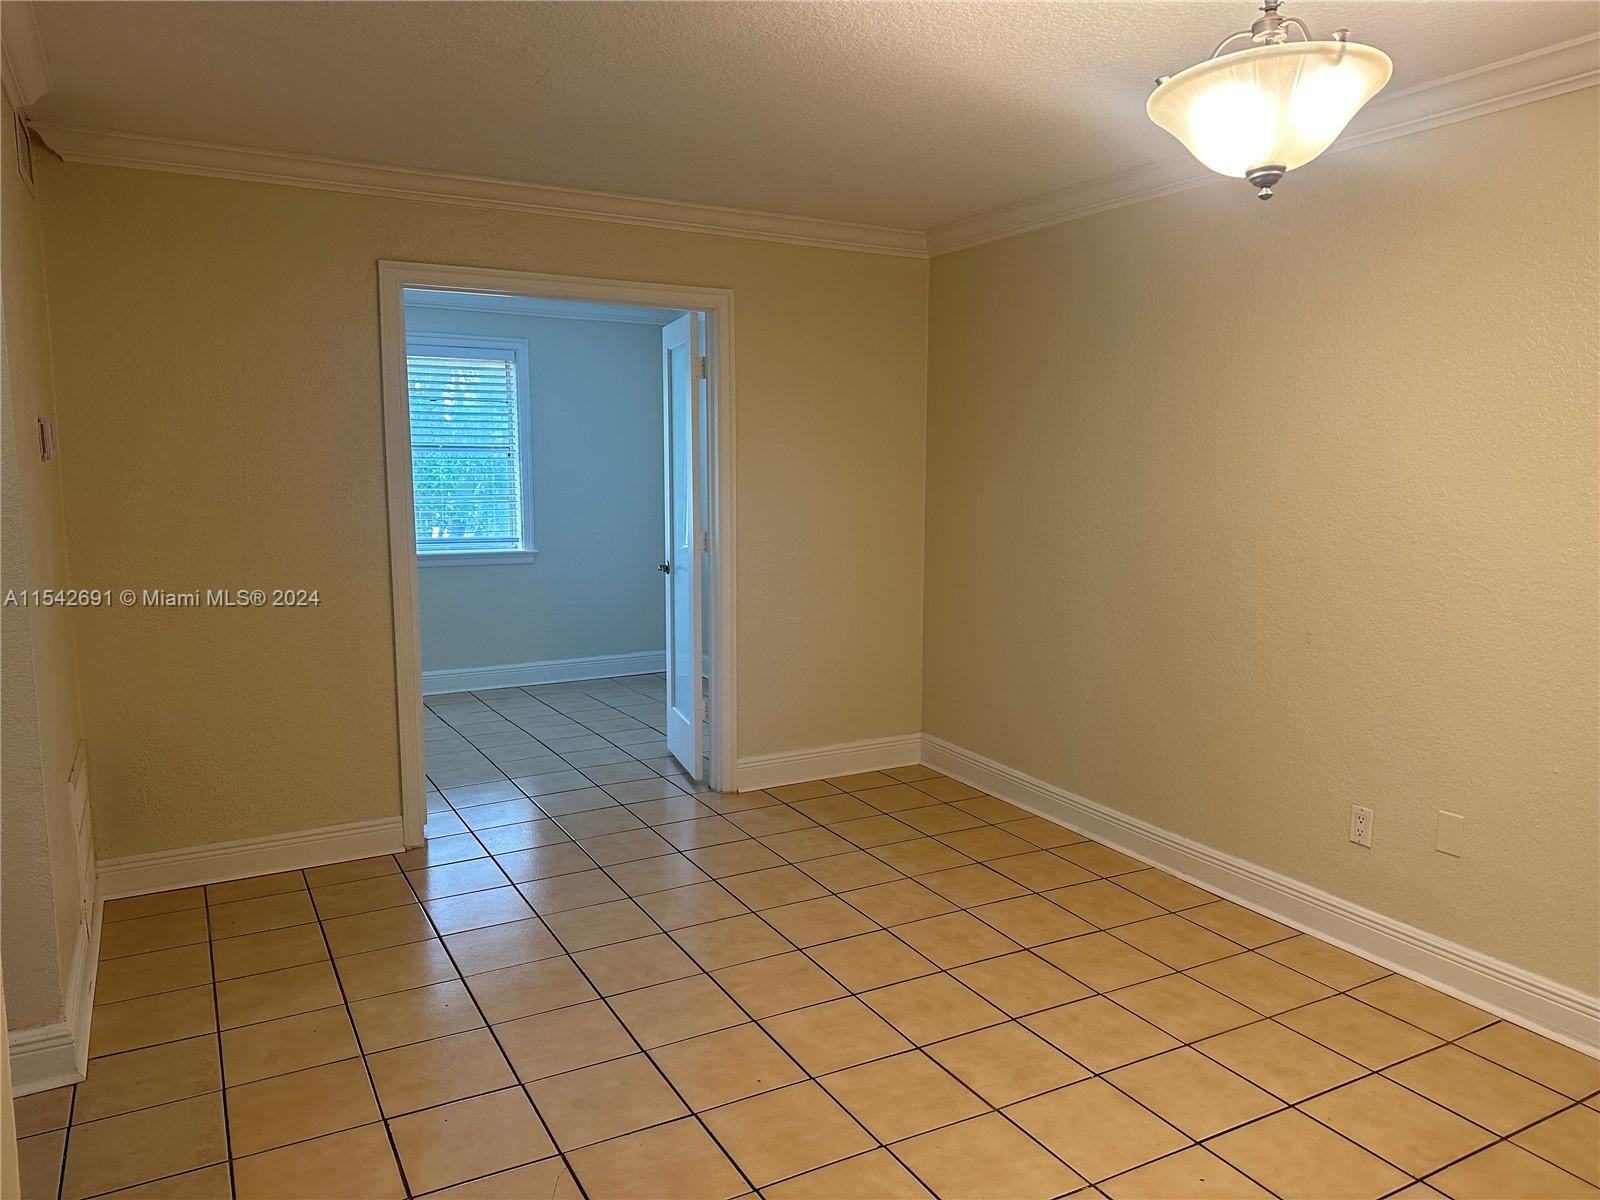 Excellent unit minutes from Dixie highway and public transportation. One bedroom with a den that can be used as second bedroom or home office. Unit is in great conditions.